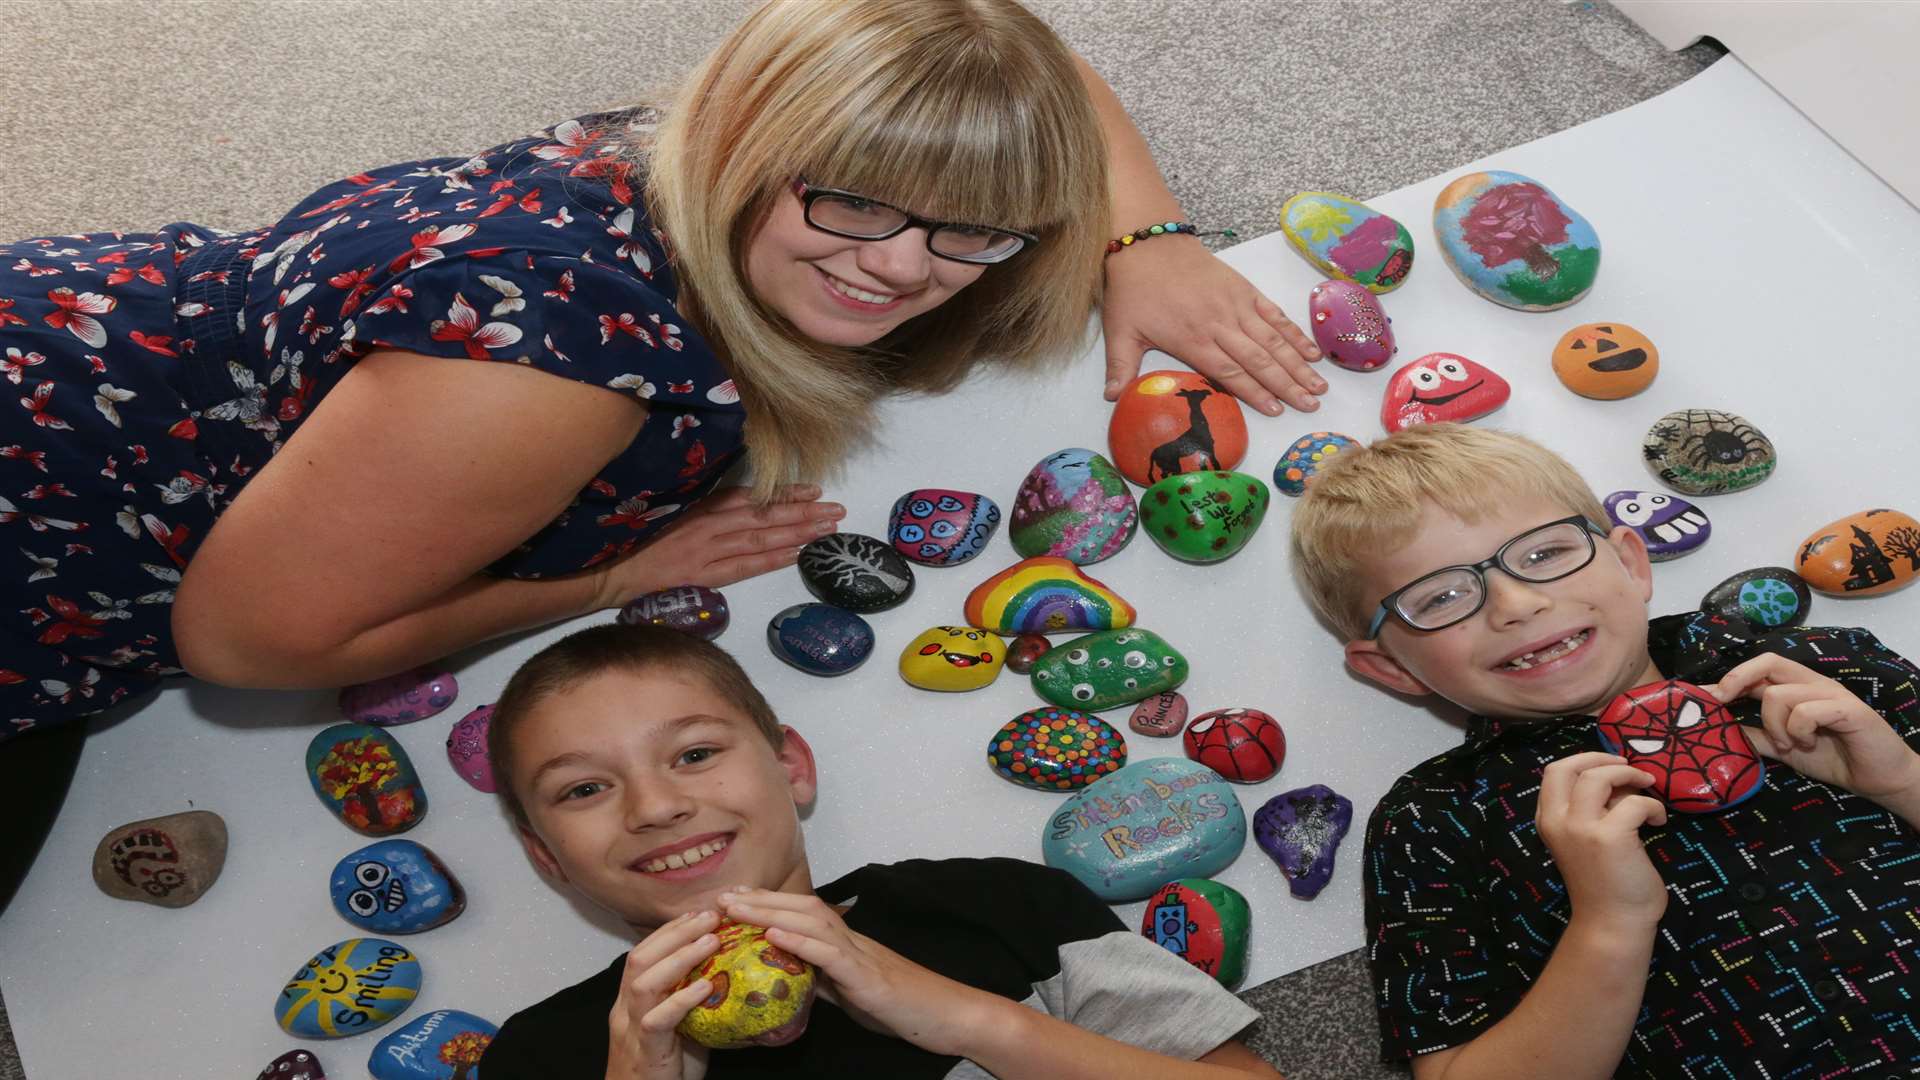 The family have painted rocks and plan to hide them around Sttingbourne